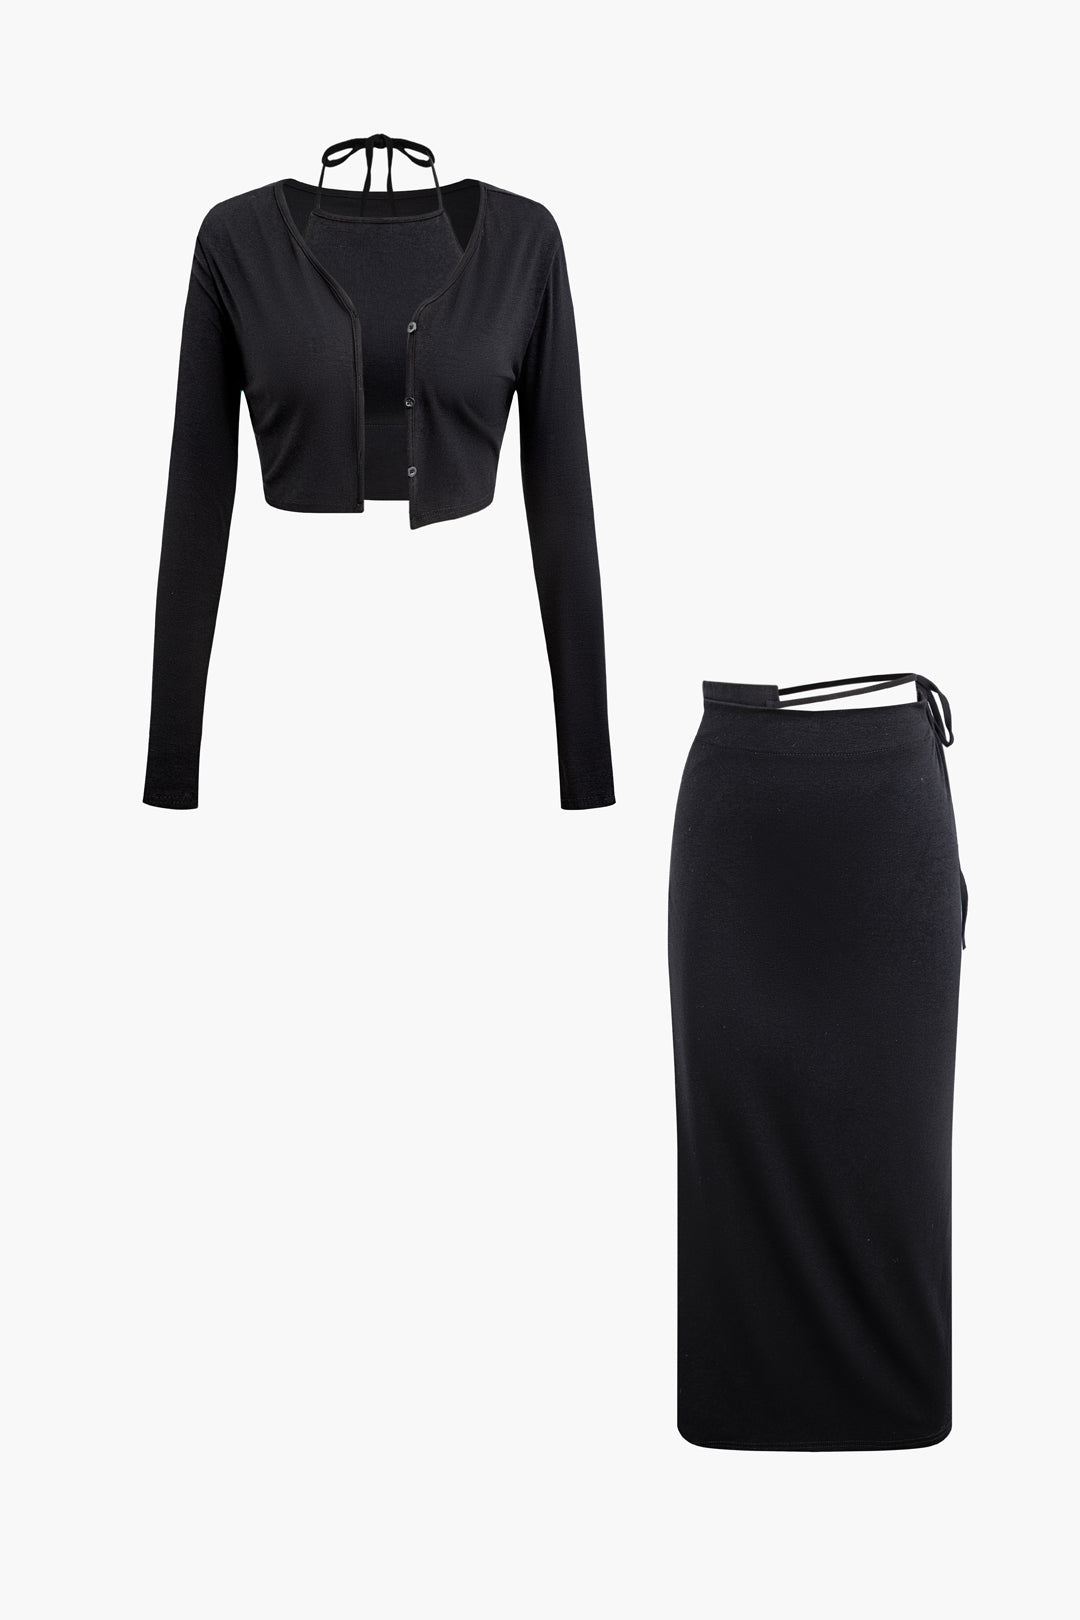 Halter Tube Top And Button Up Long Sleeve Top And Tie Waist Midi Skirt Set